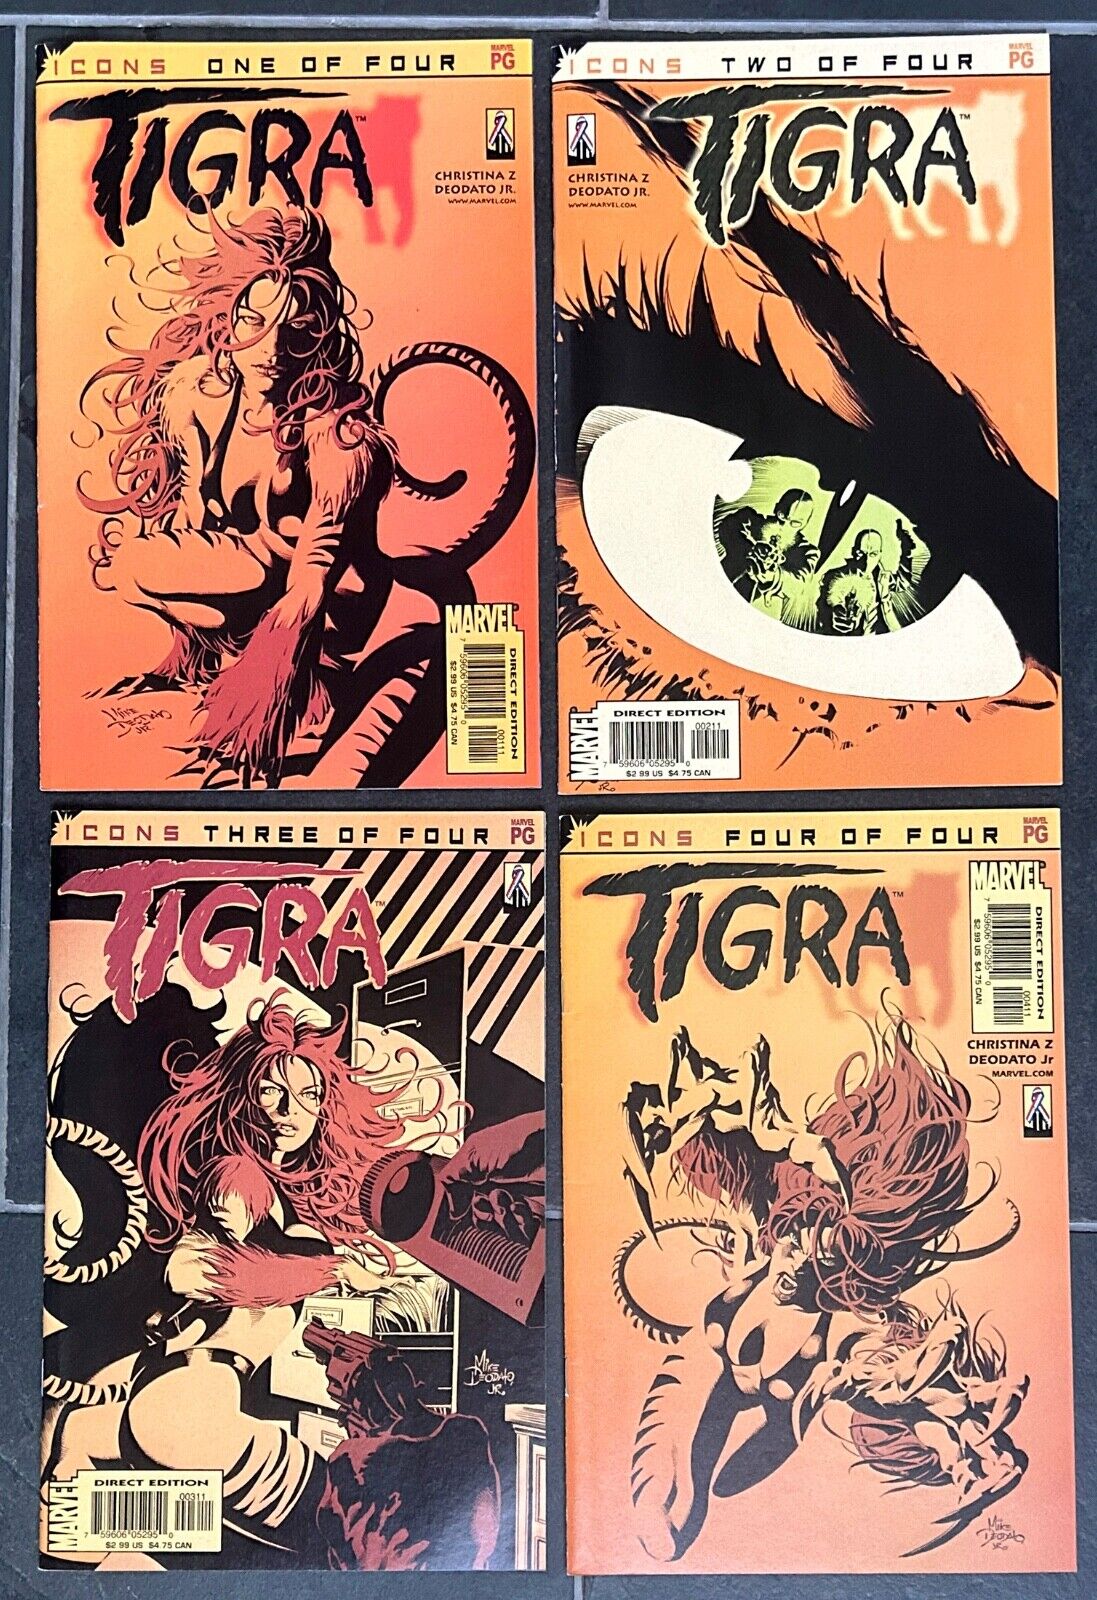 ALL 4 issues of TIGRA the COMPLETE SERIES Marvel Comics 2002 EXCELLENT condition